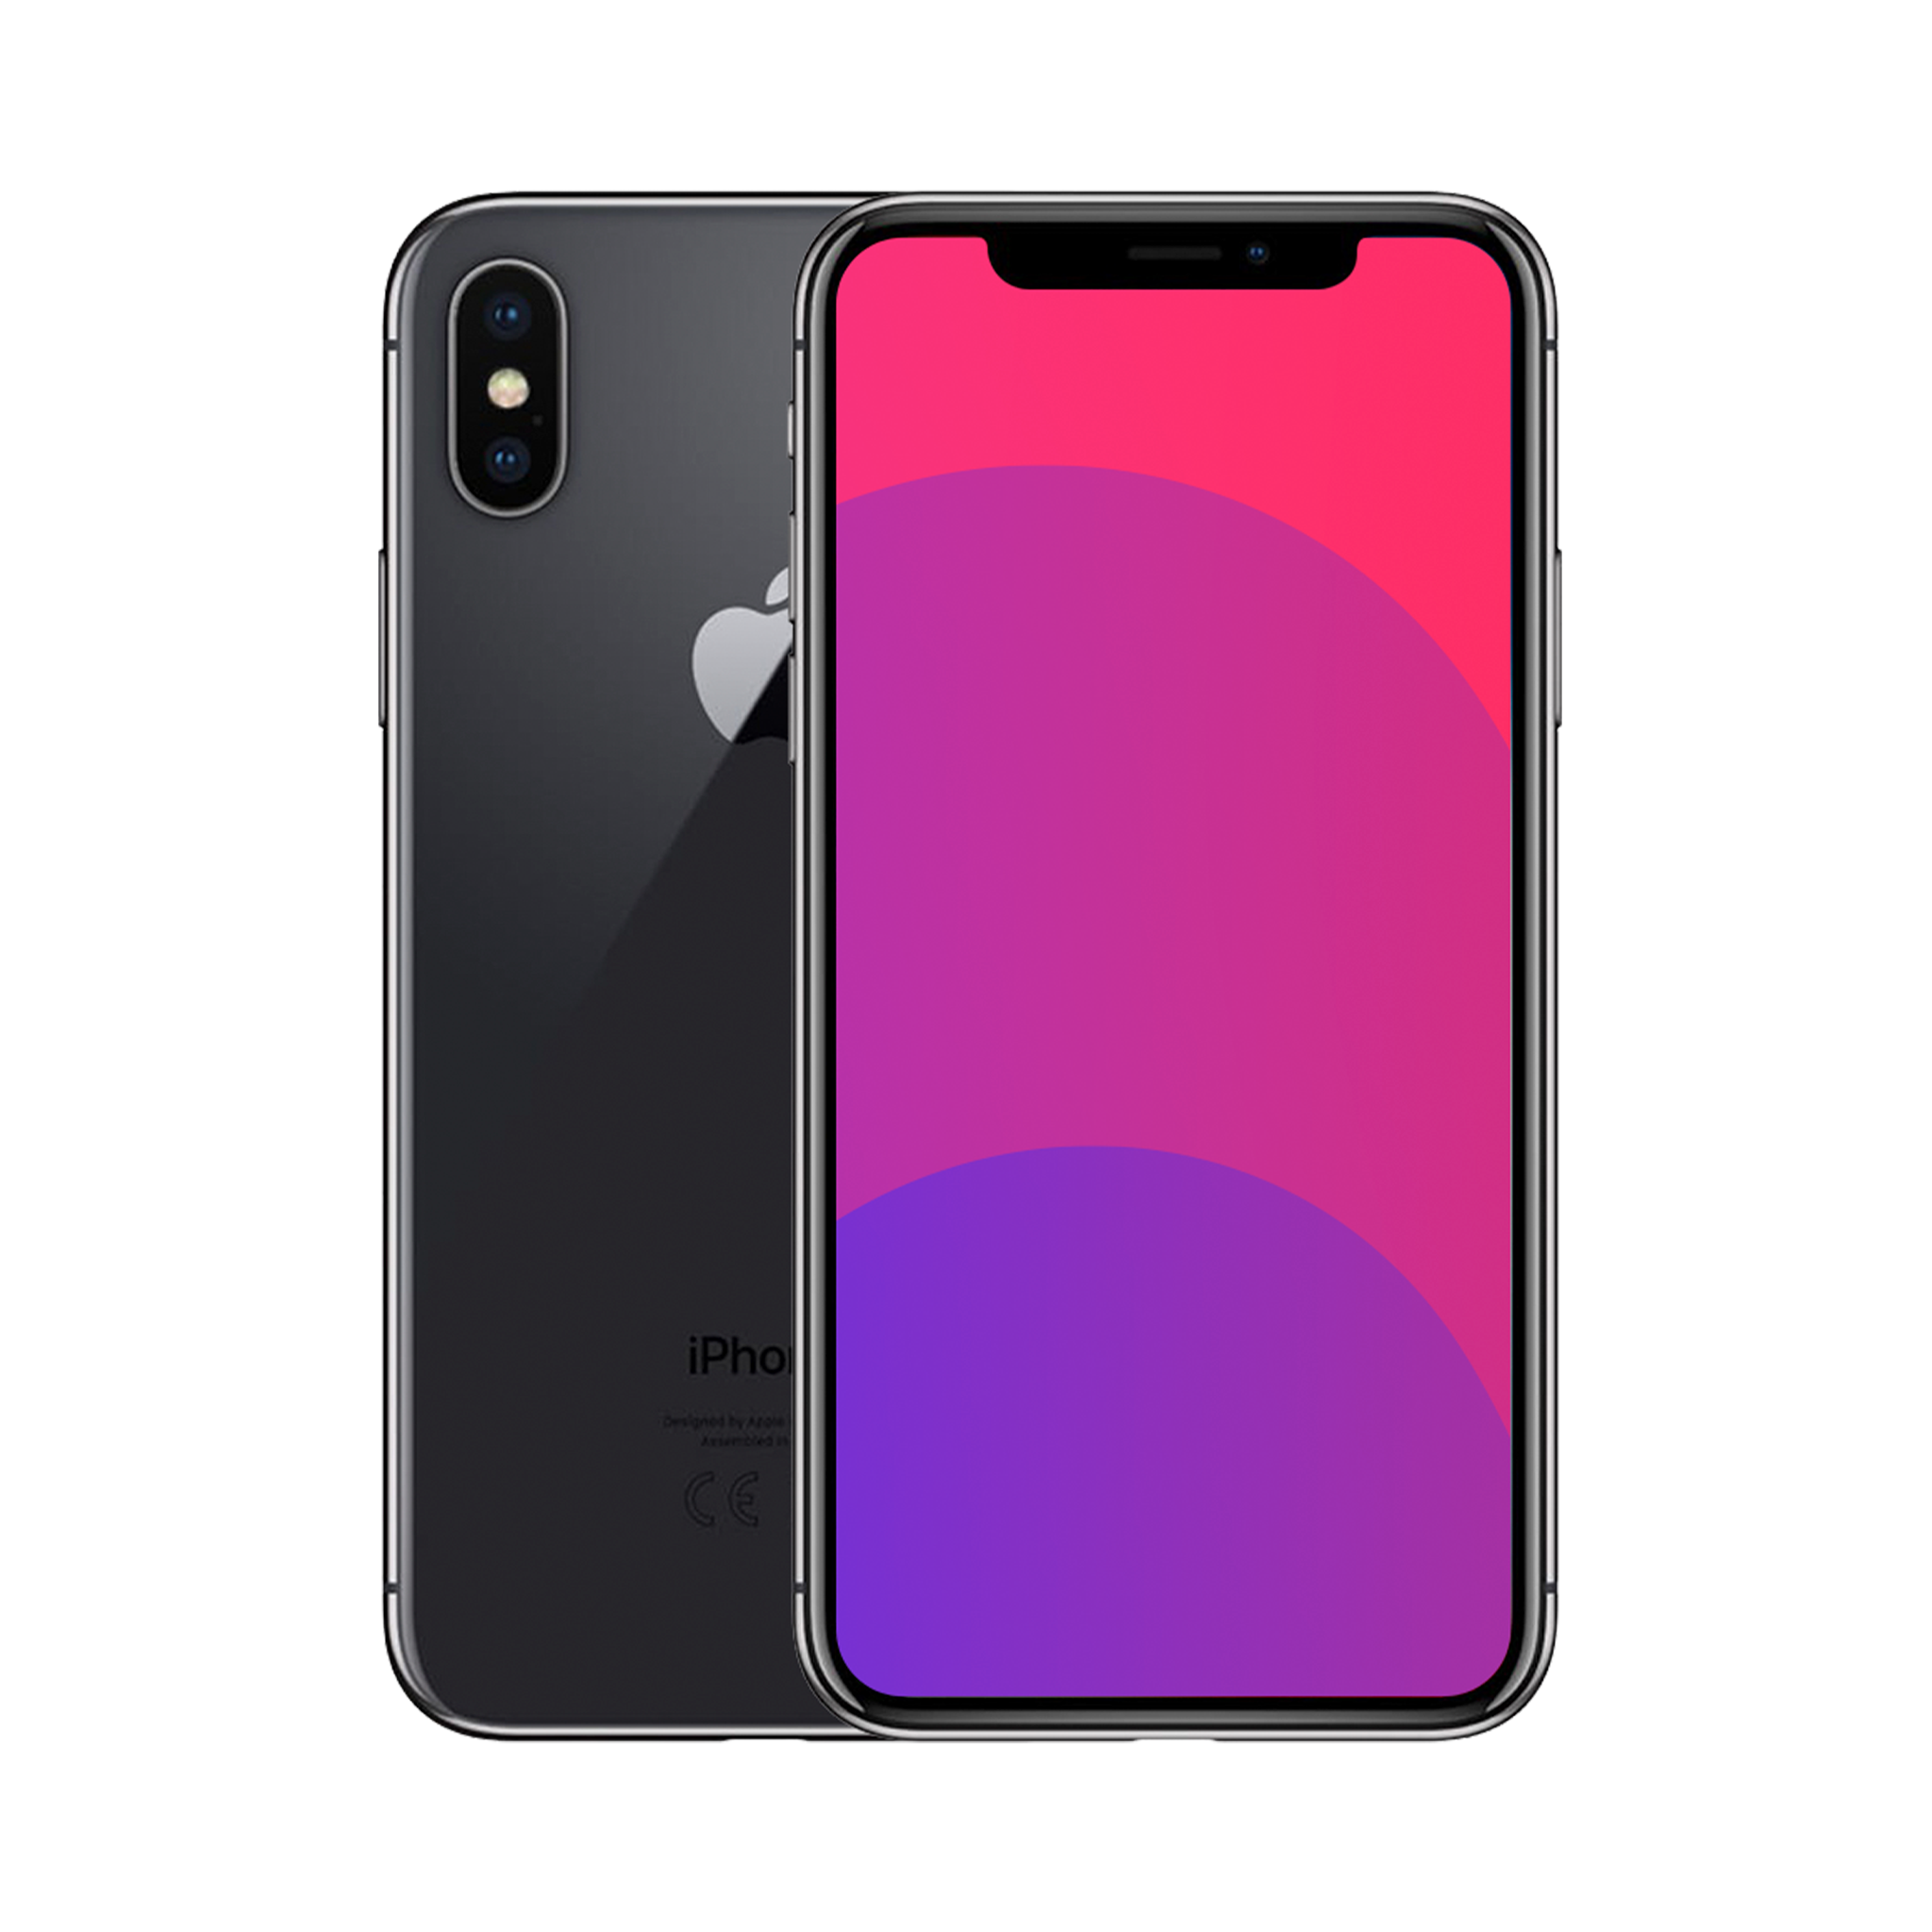 Apple iPhone X 64GB Space Grey - weFix  Buy Second Hand Phones, Trade In  your device or Book a Repair